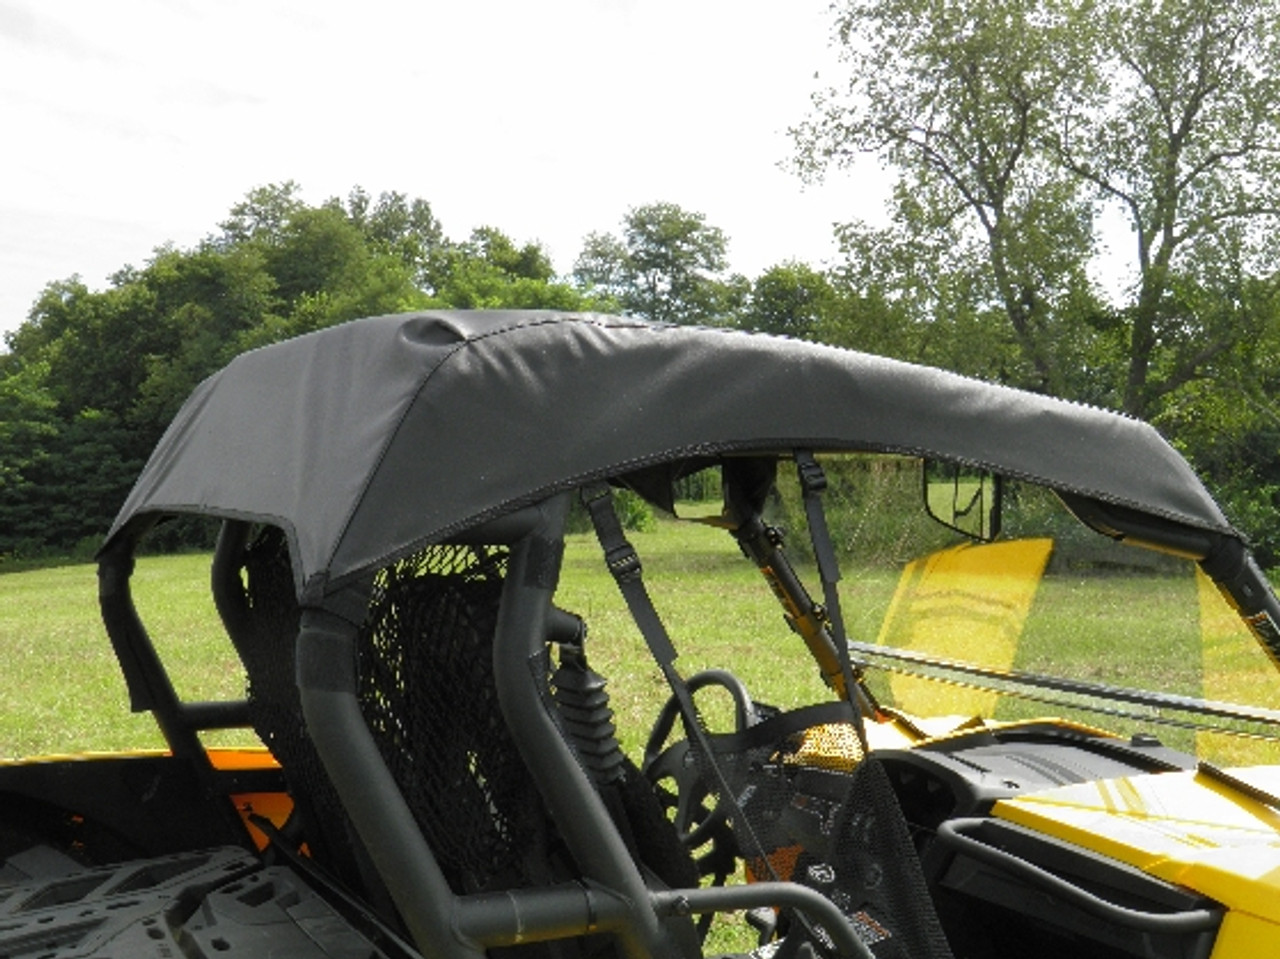 3 Star side x side can-am maverick soft roof side view close up